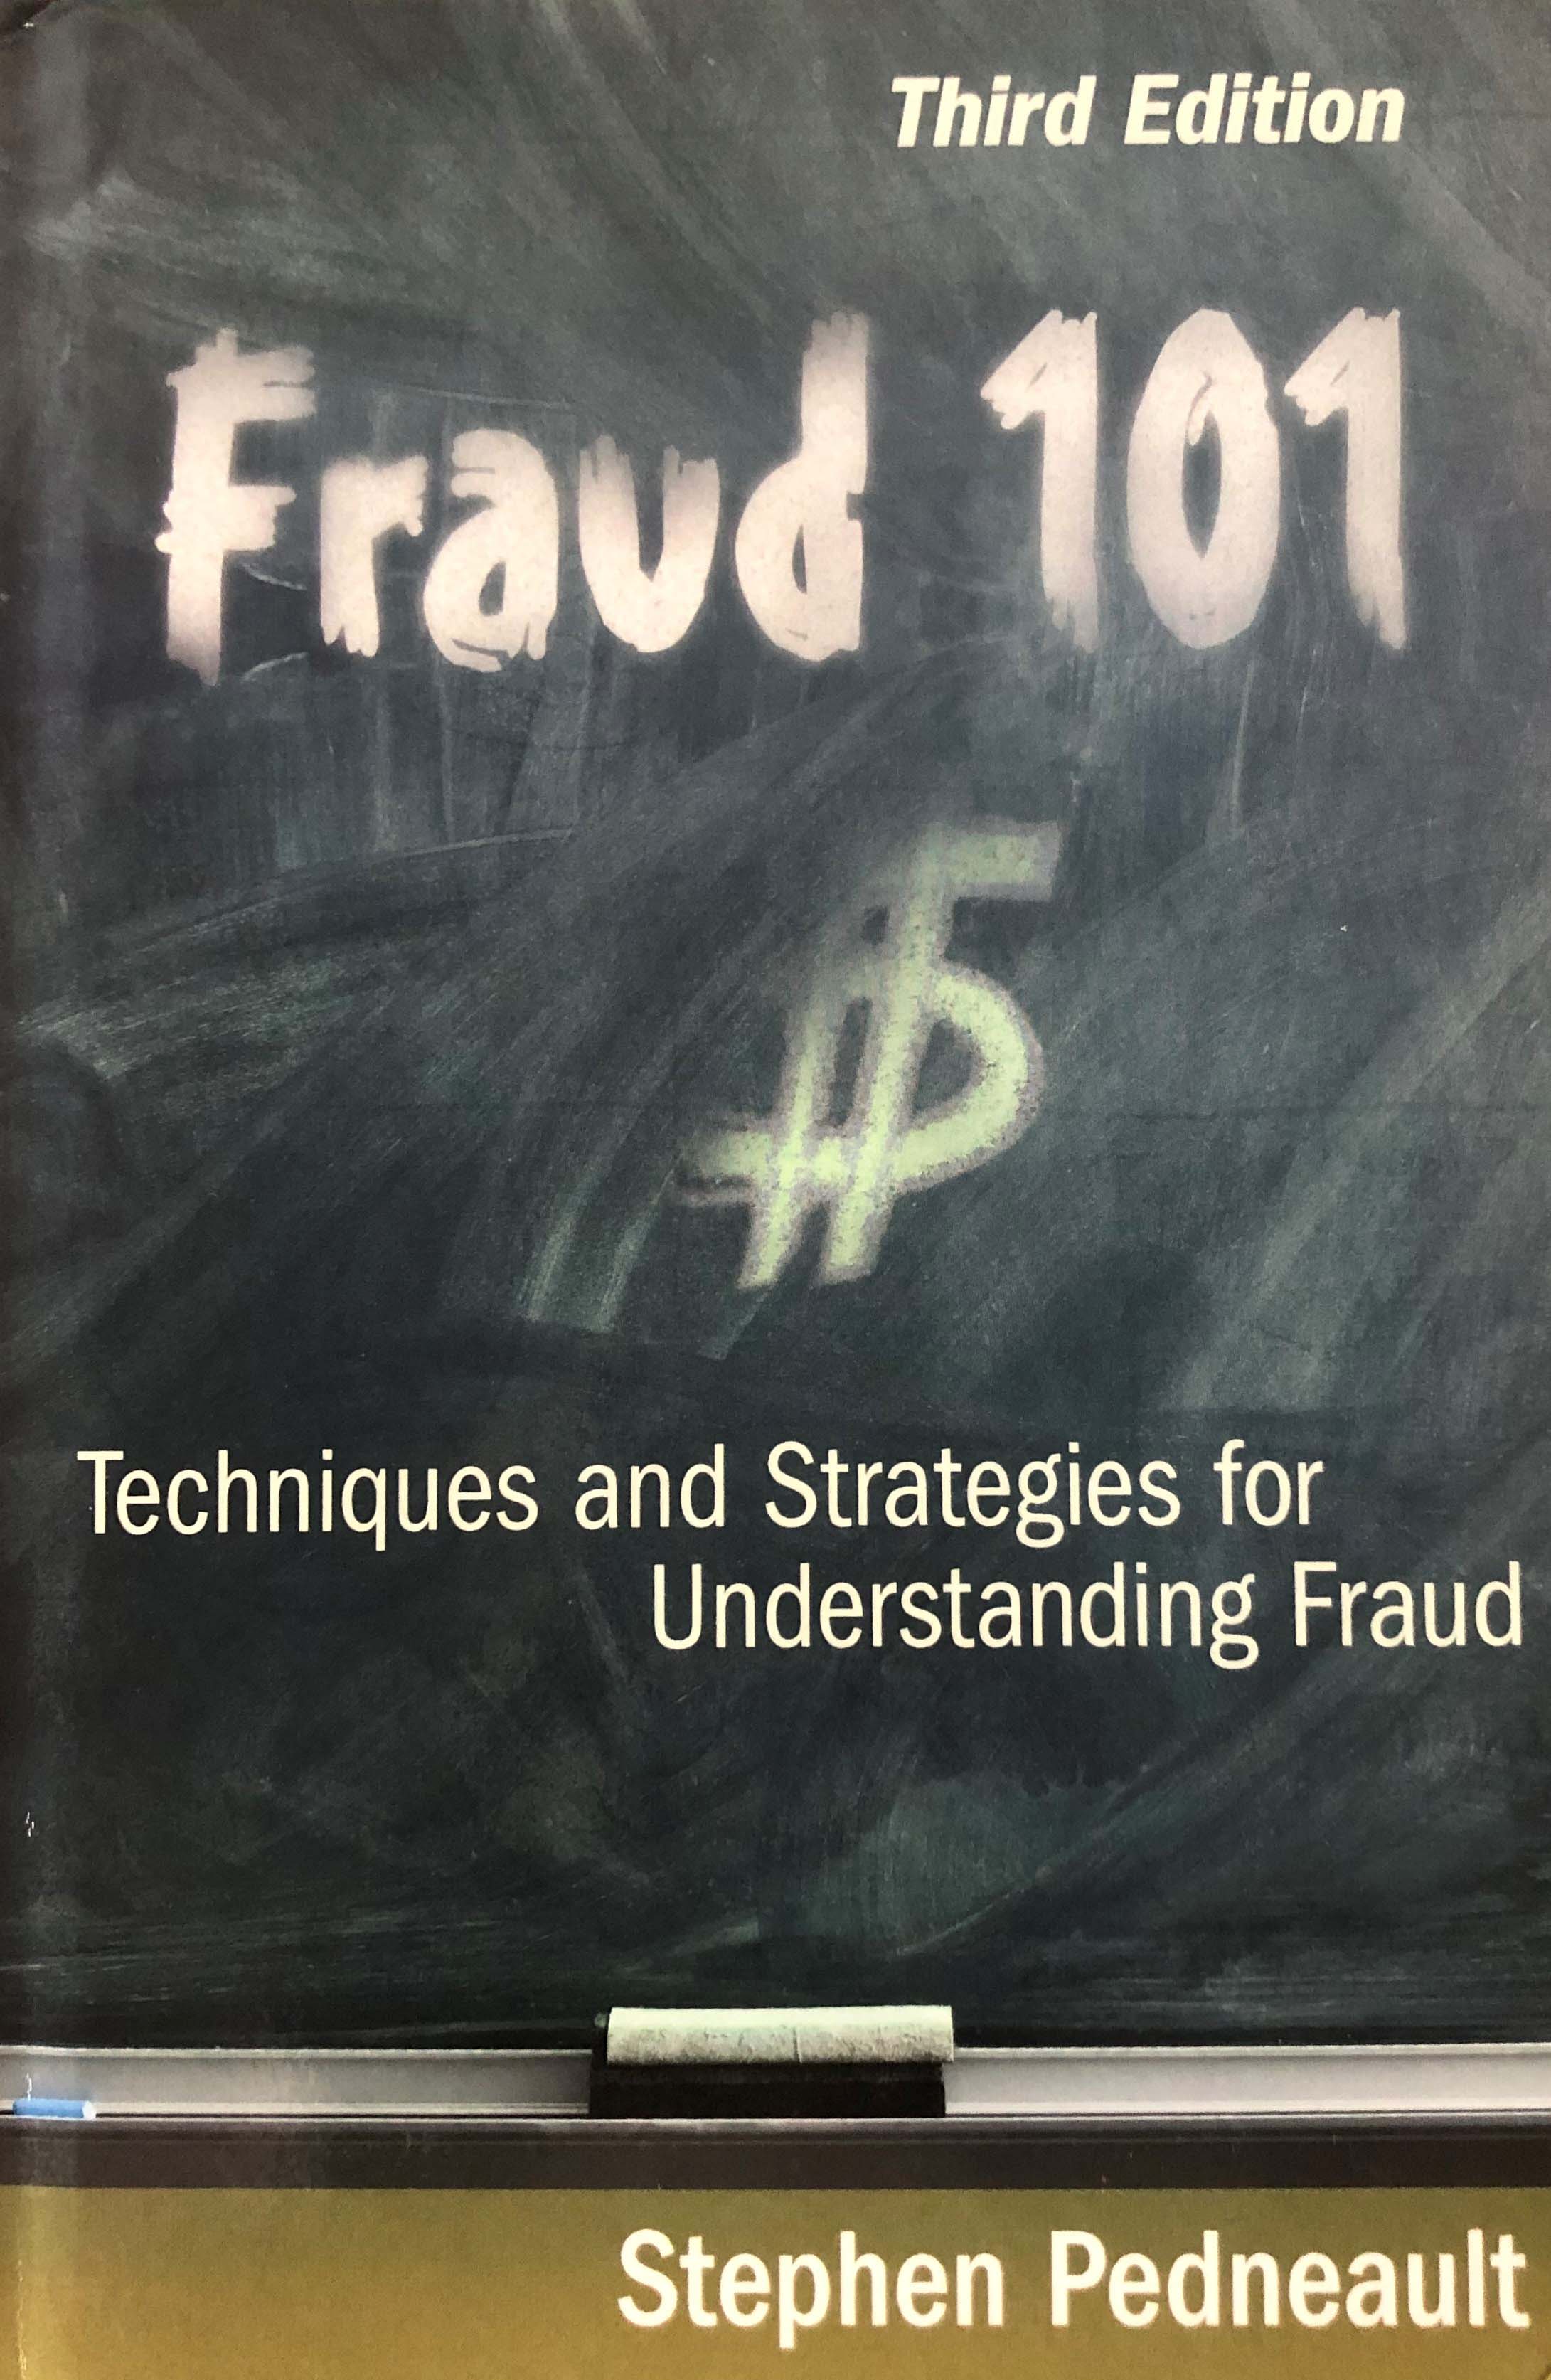 Description Fraud 101: Techniques and Strategies for Understanding Fraud